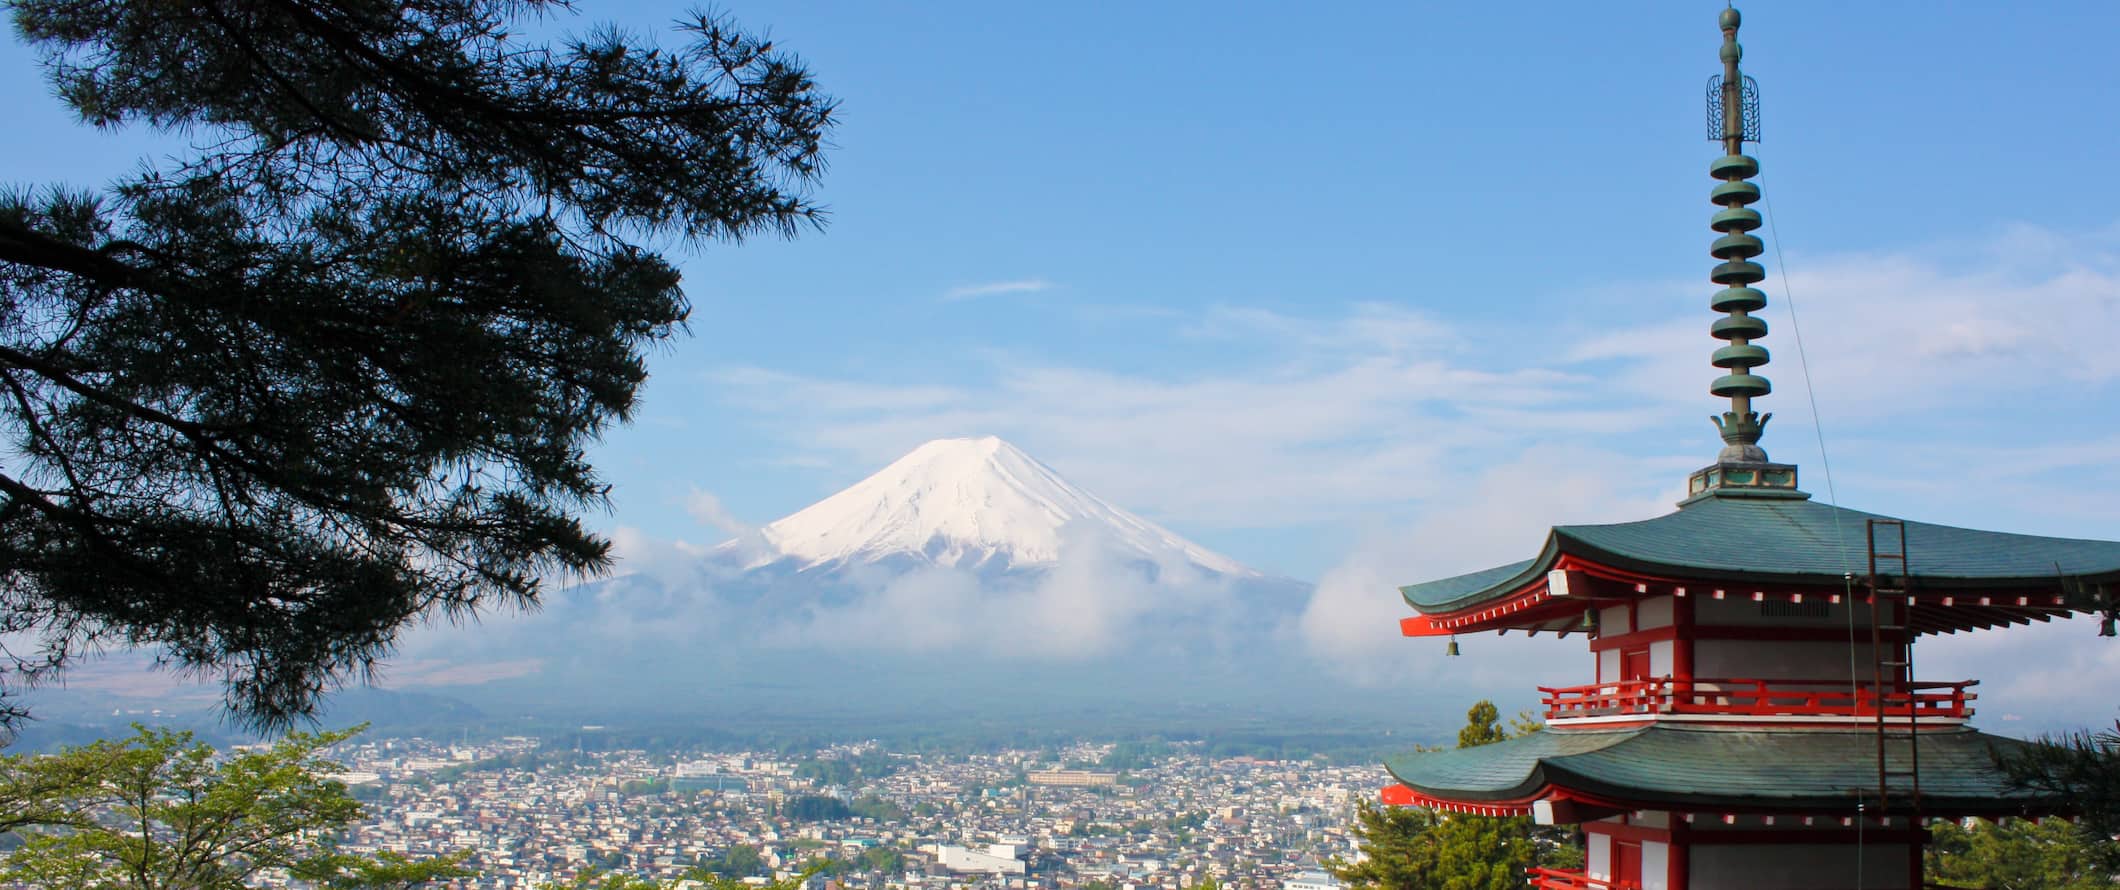 Mount Fuji in the distances on a sunny day with a pagoda in the foreground in Japan